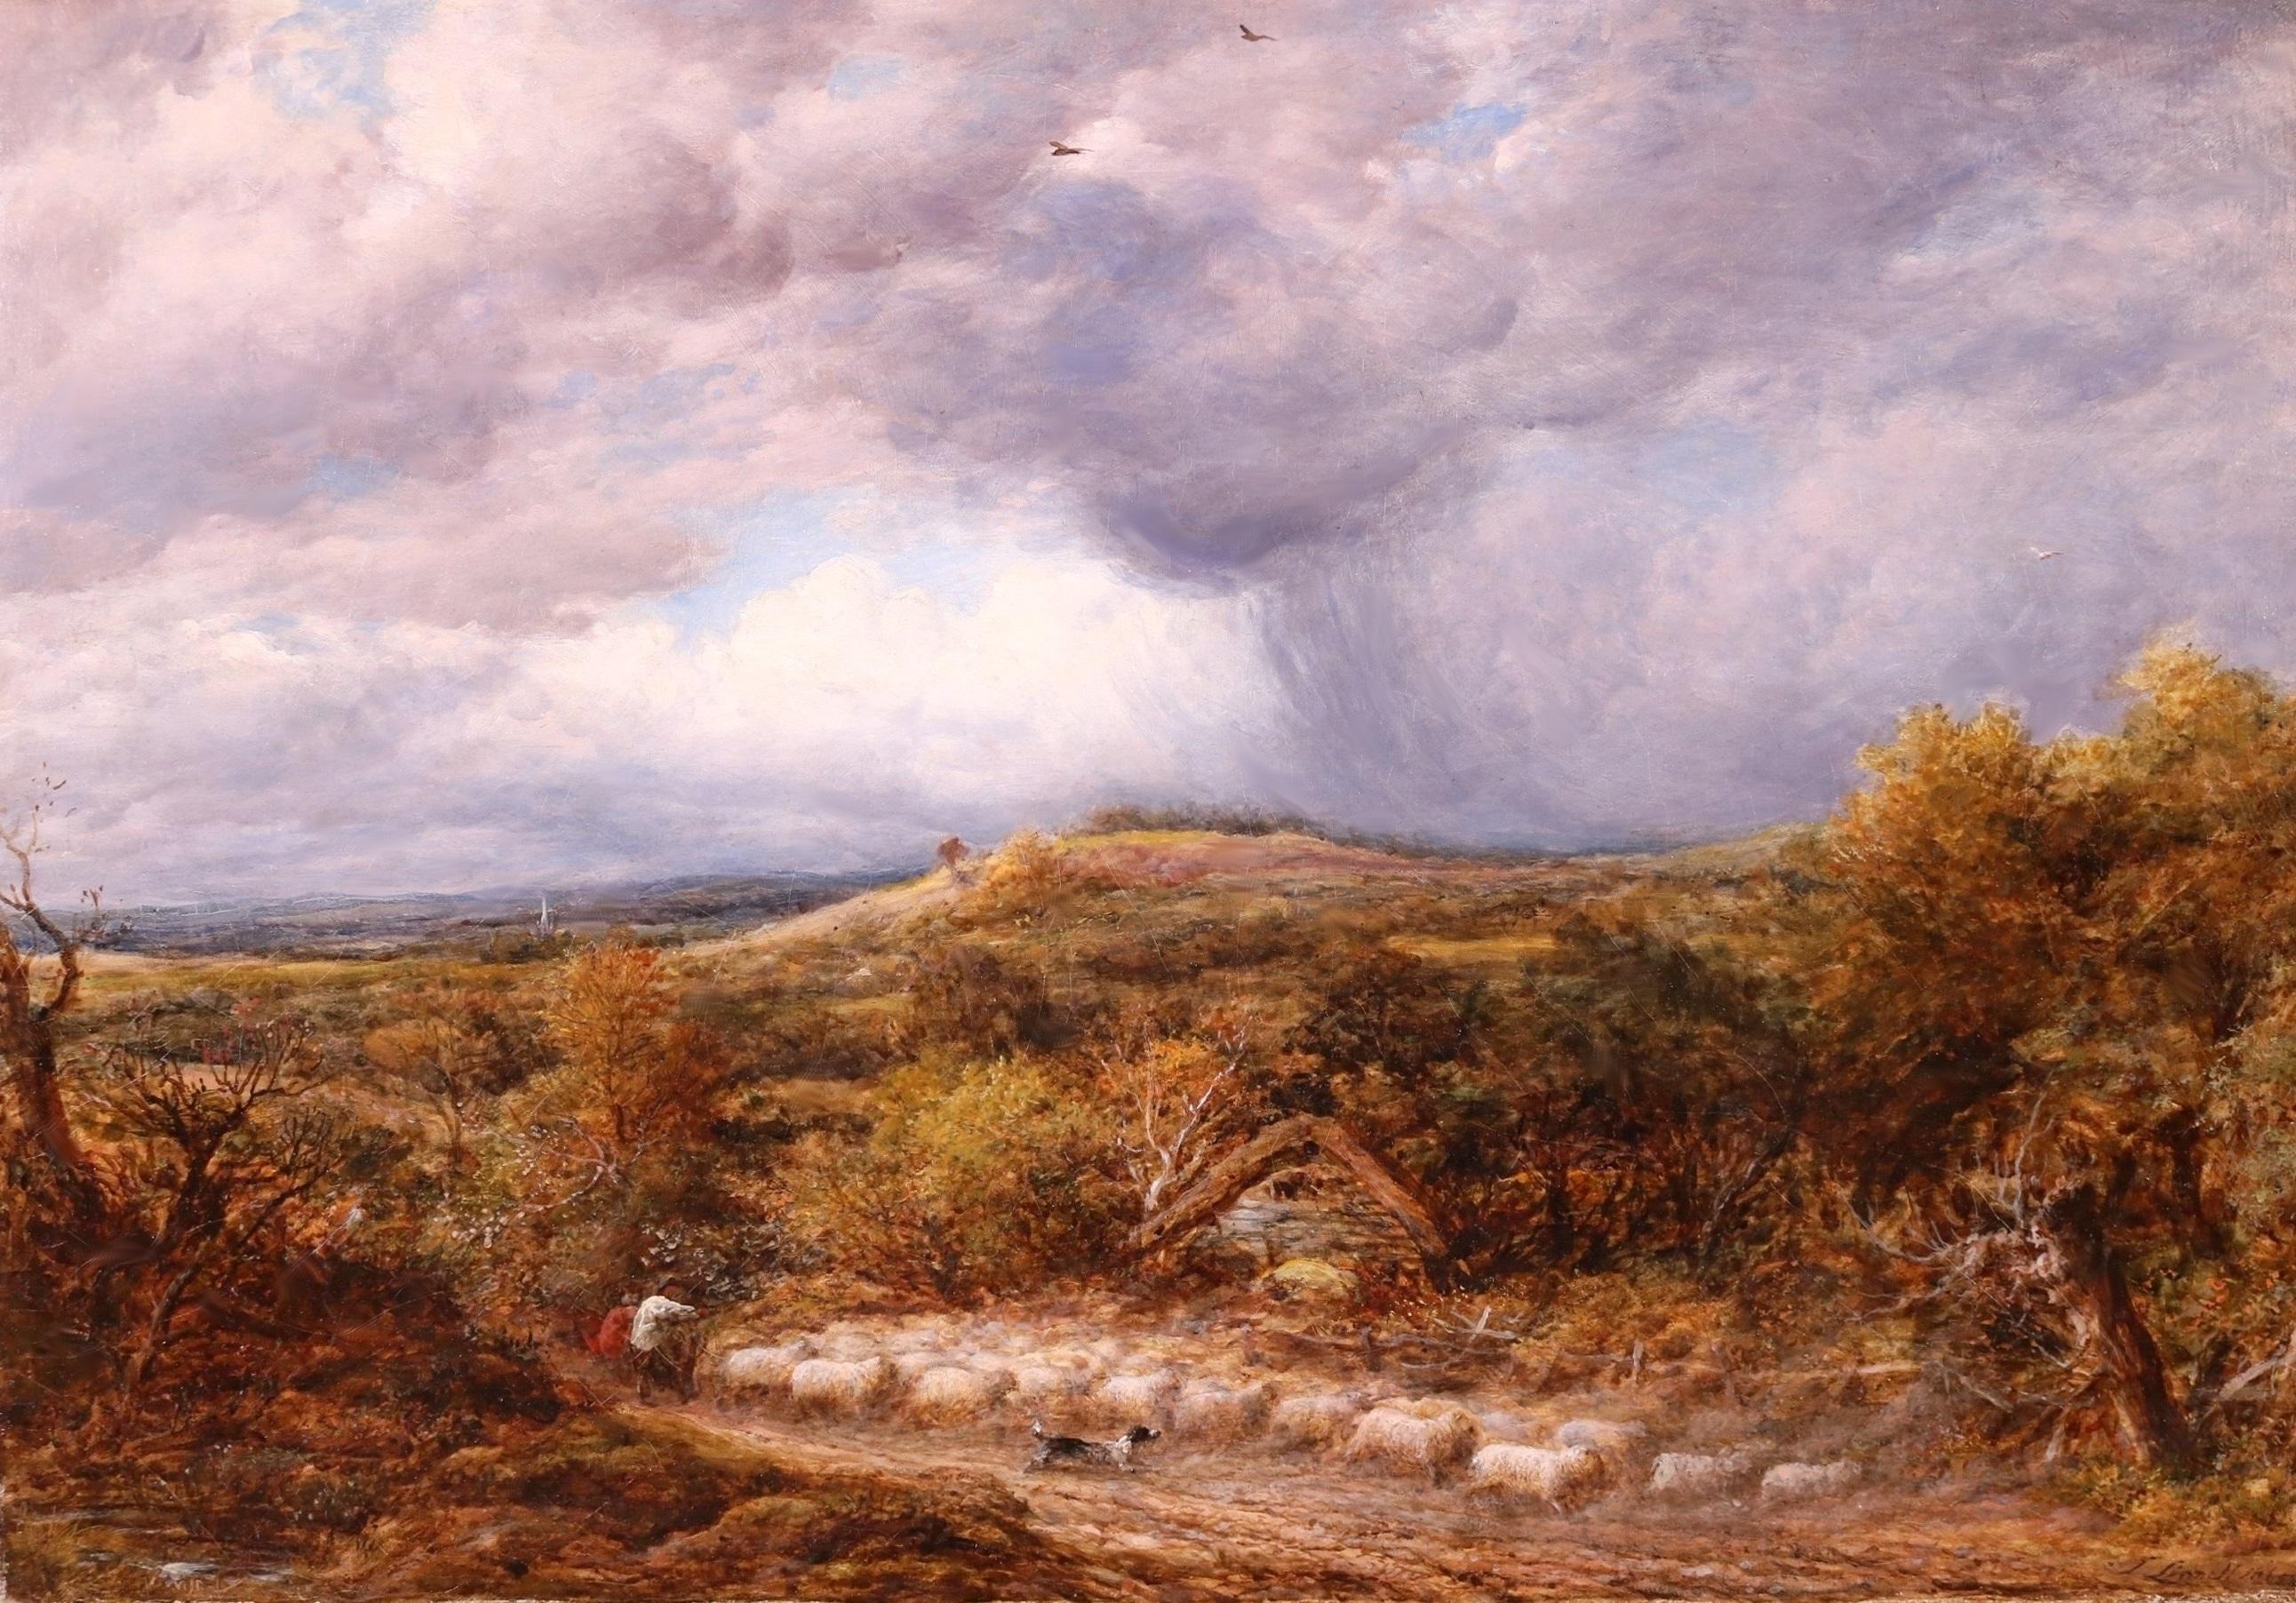 Shepherd & Sheep in Thunder Storm - Large 19th Century Landscape Oil Painting 1